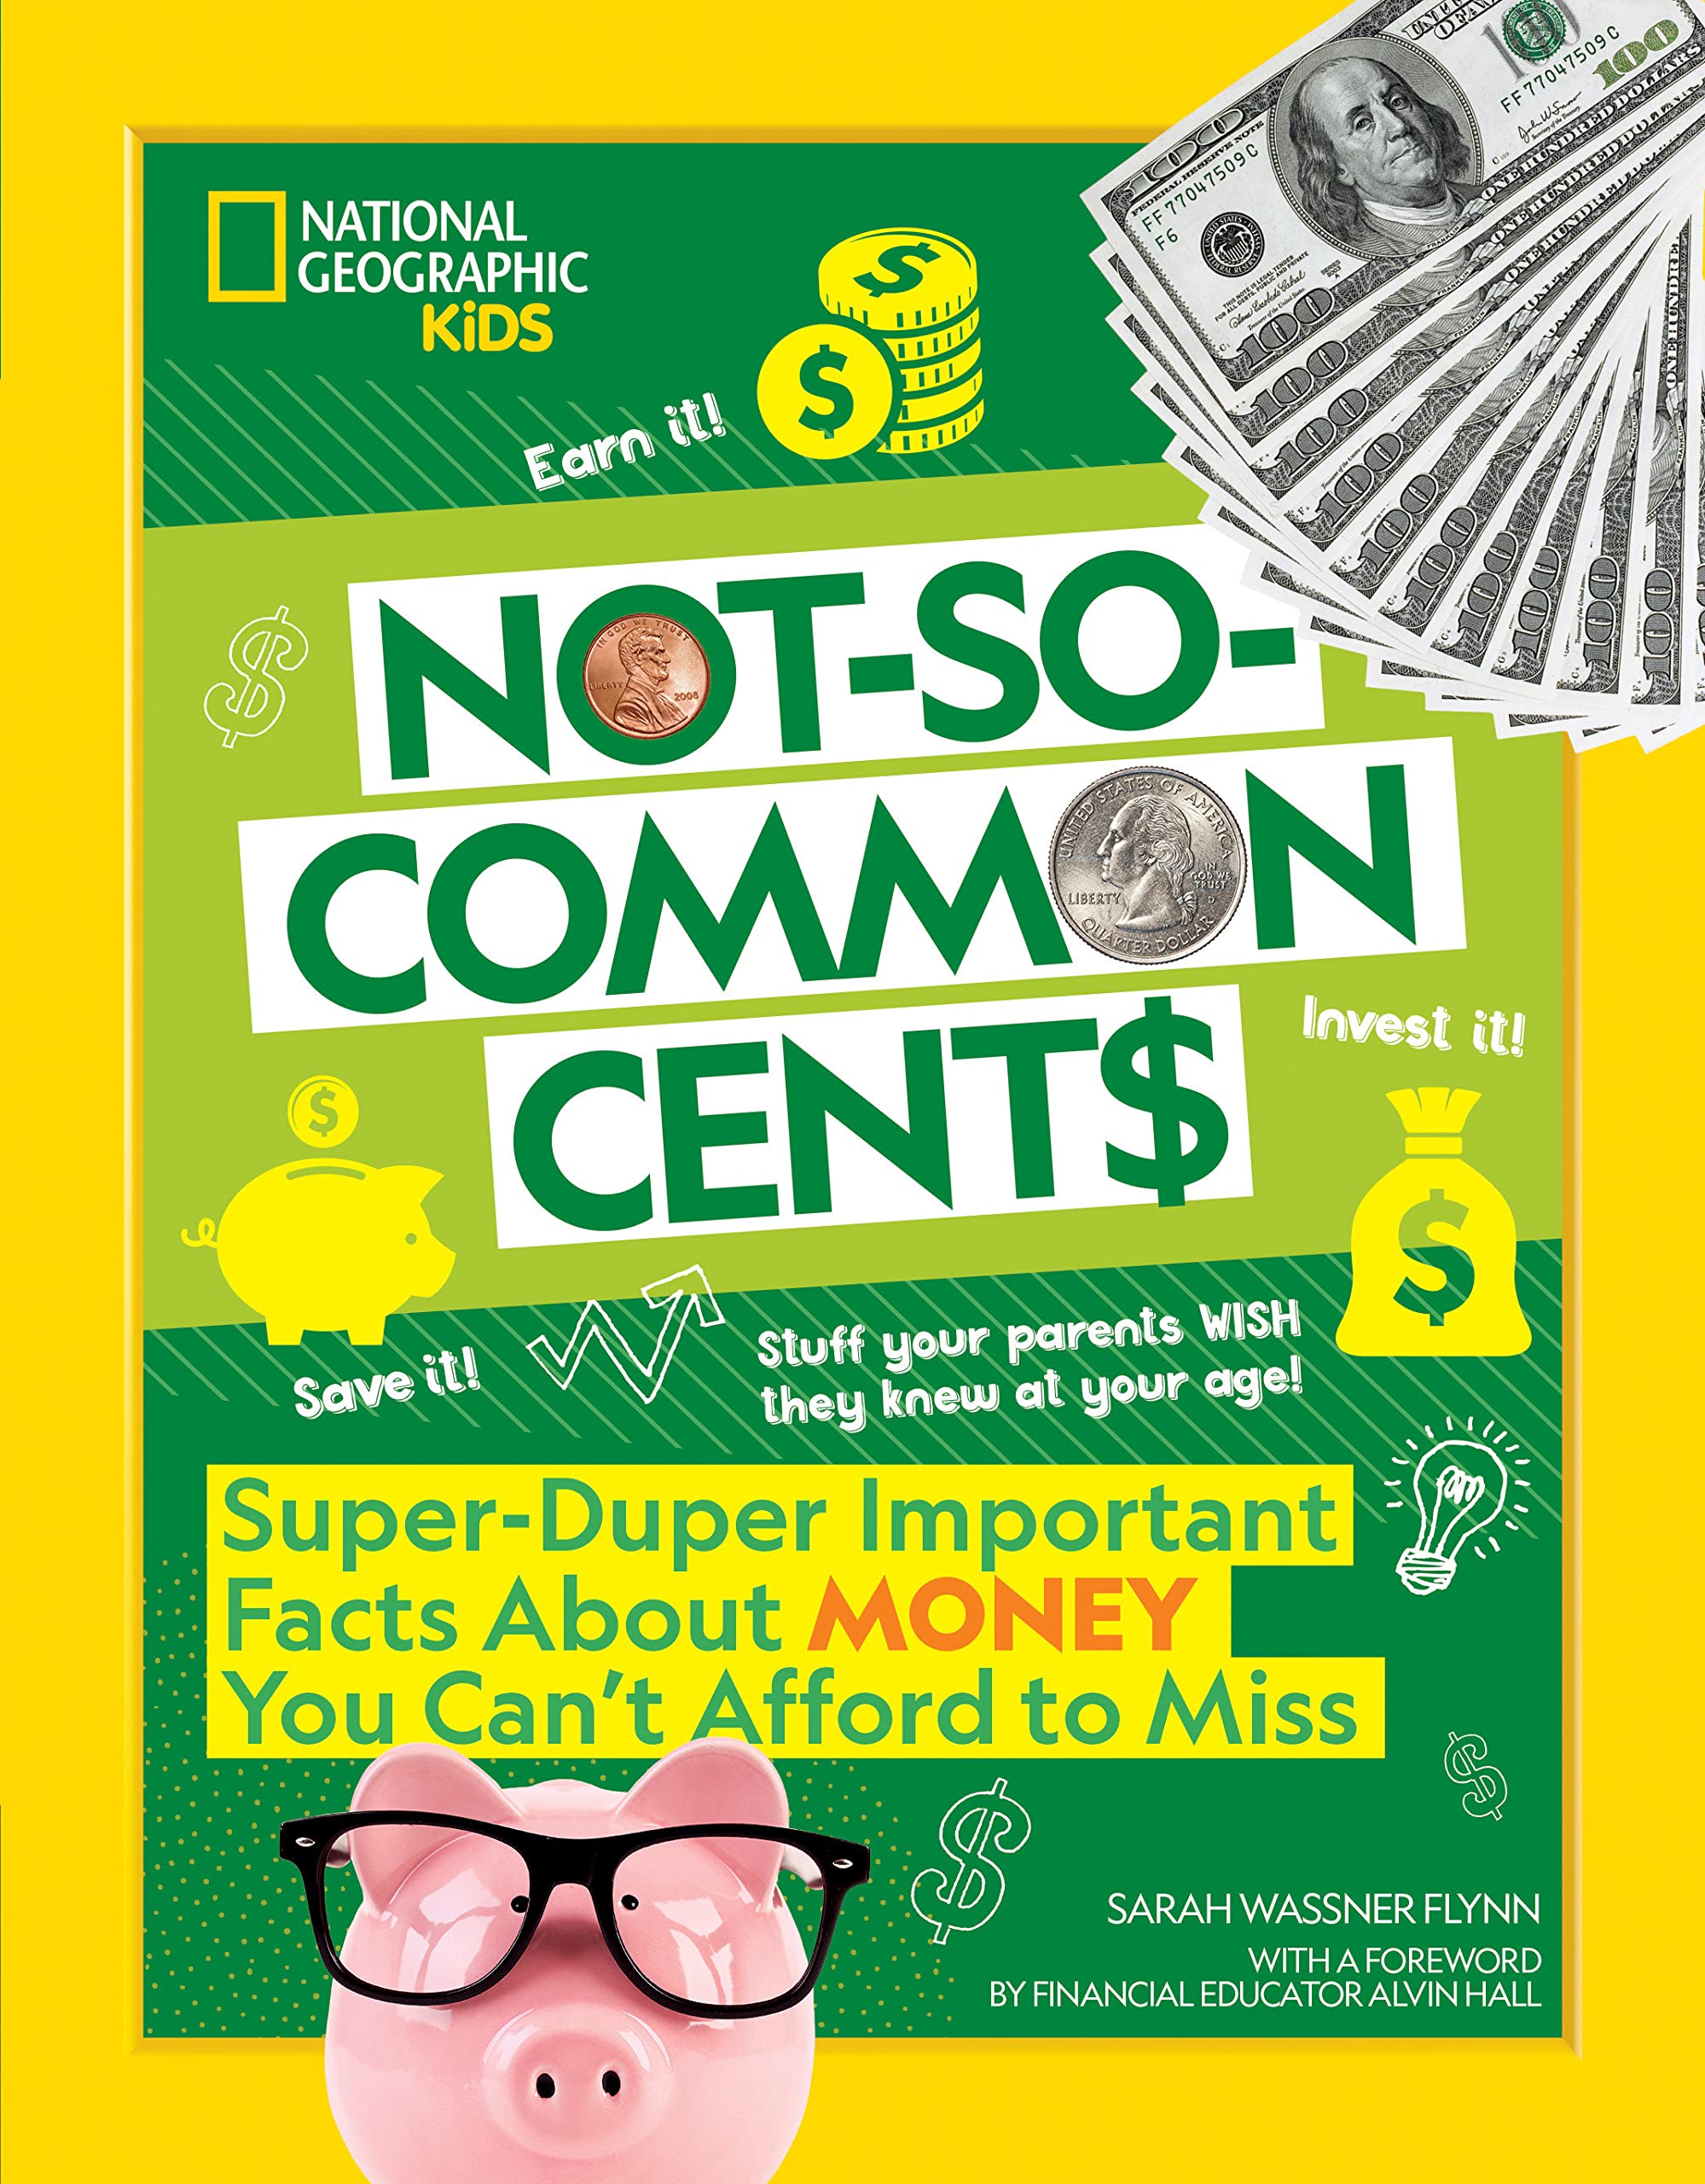 Not-So-Common Cents: Super Duper Important Facts About Money You Can’t Afford to Miss